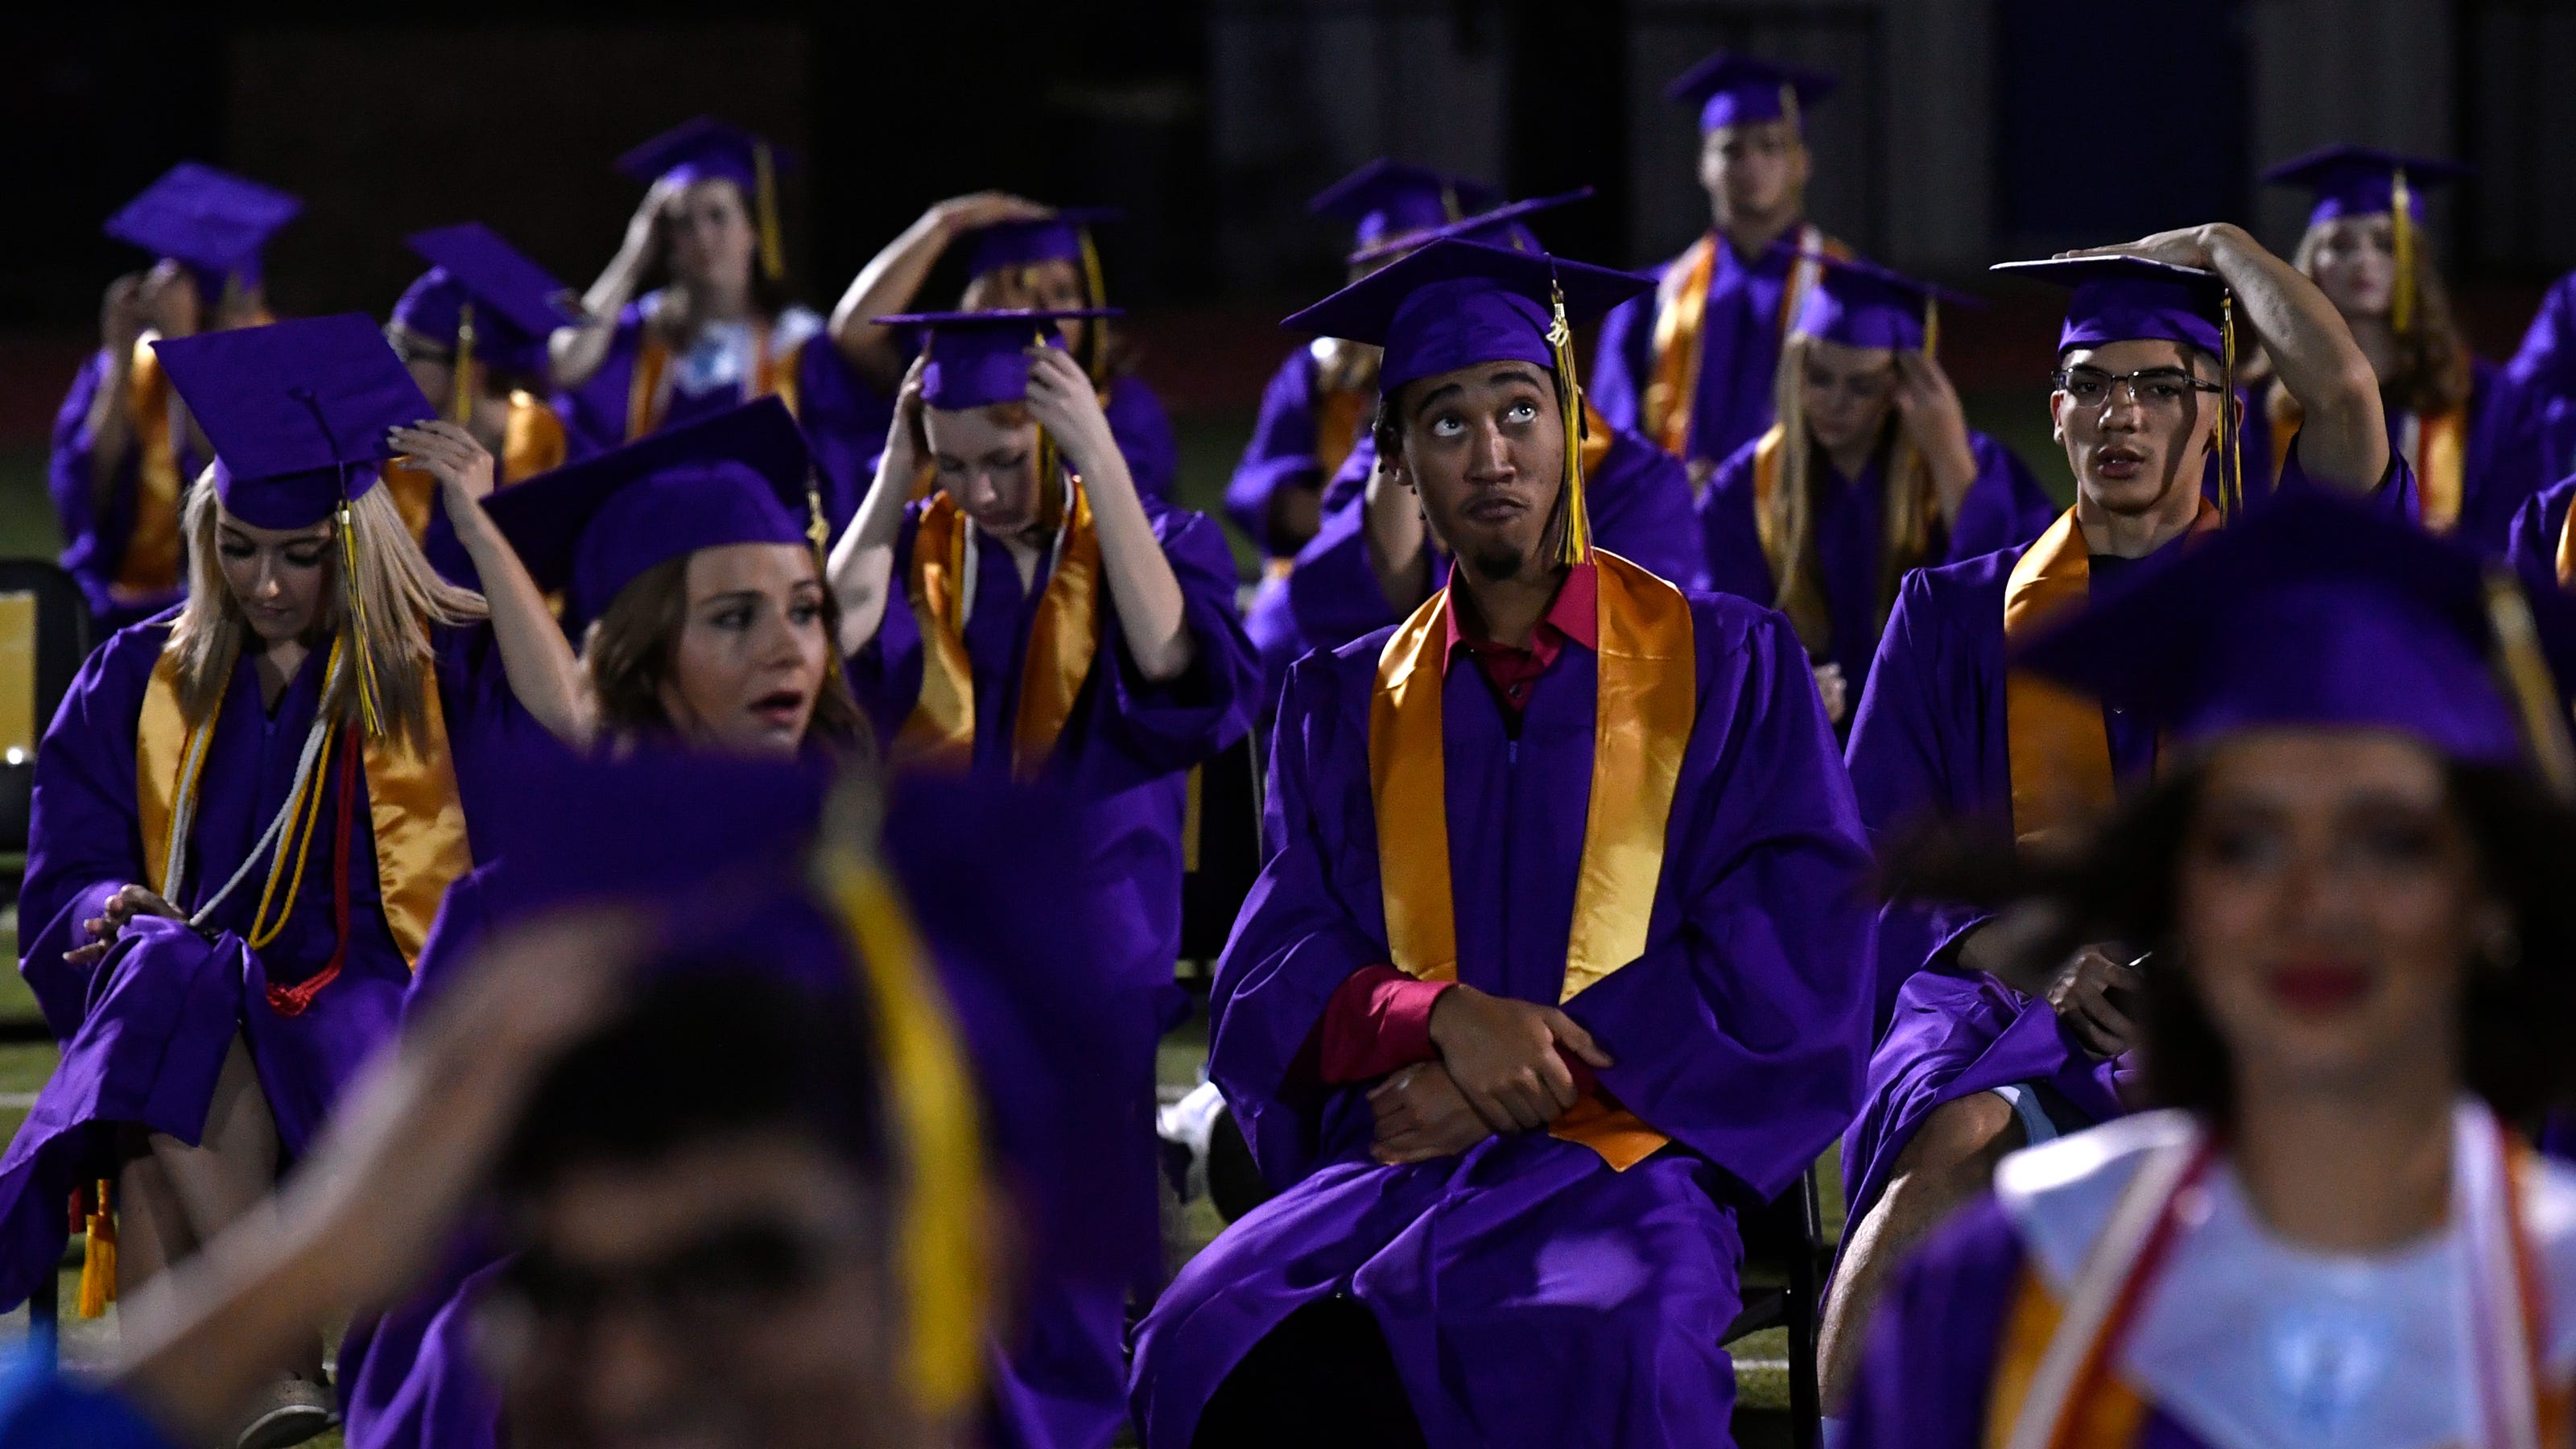 Nostalgia and feels while covering Abilene Wylie High School's graduation